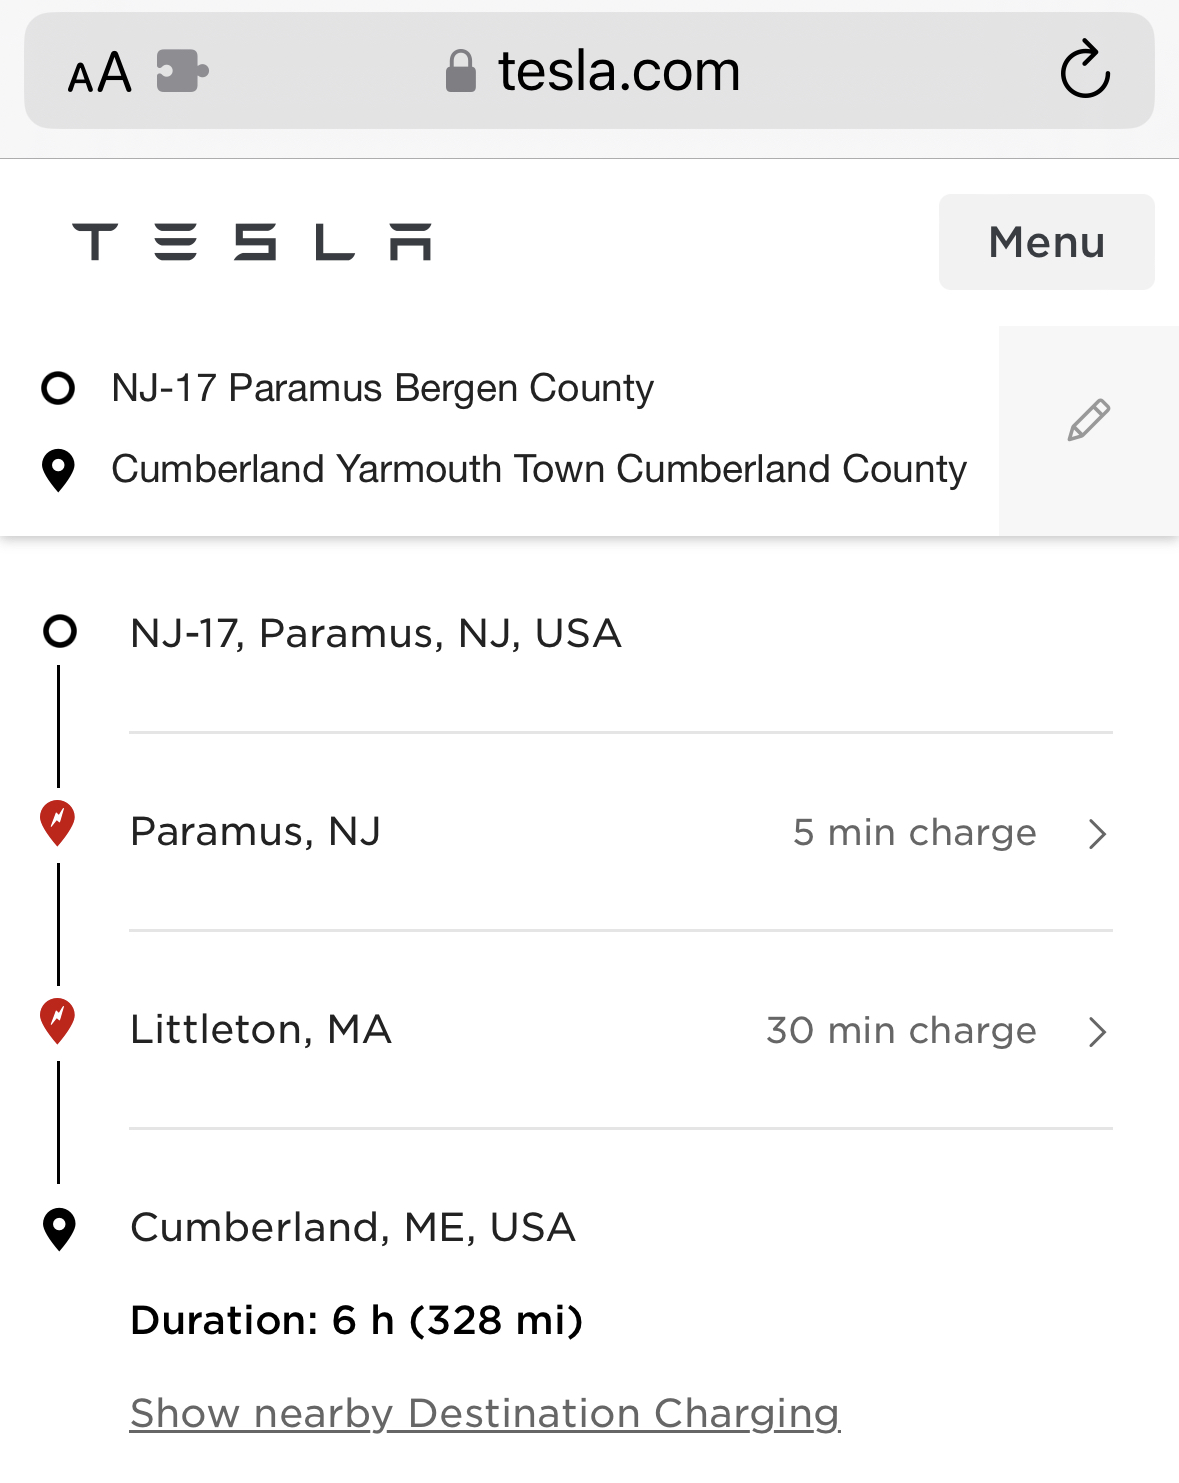 Planning my route home from pickup | Tesla Motors Club